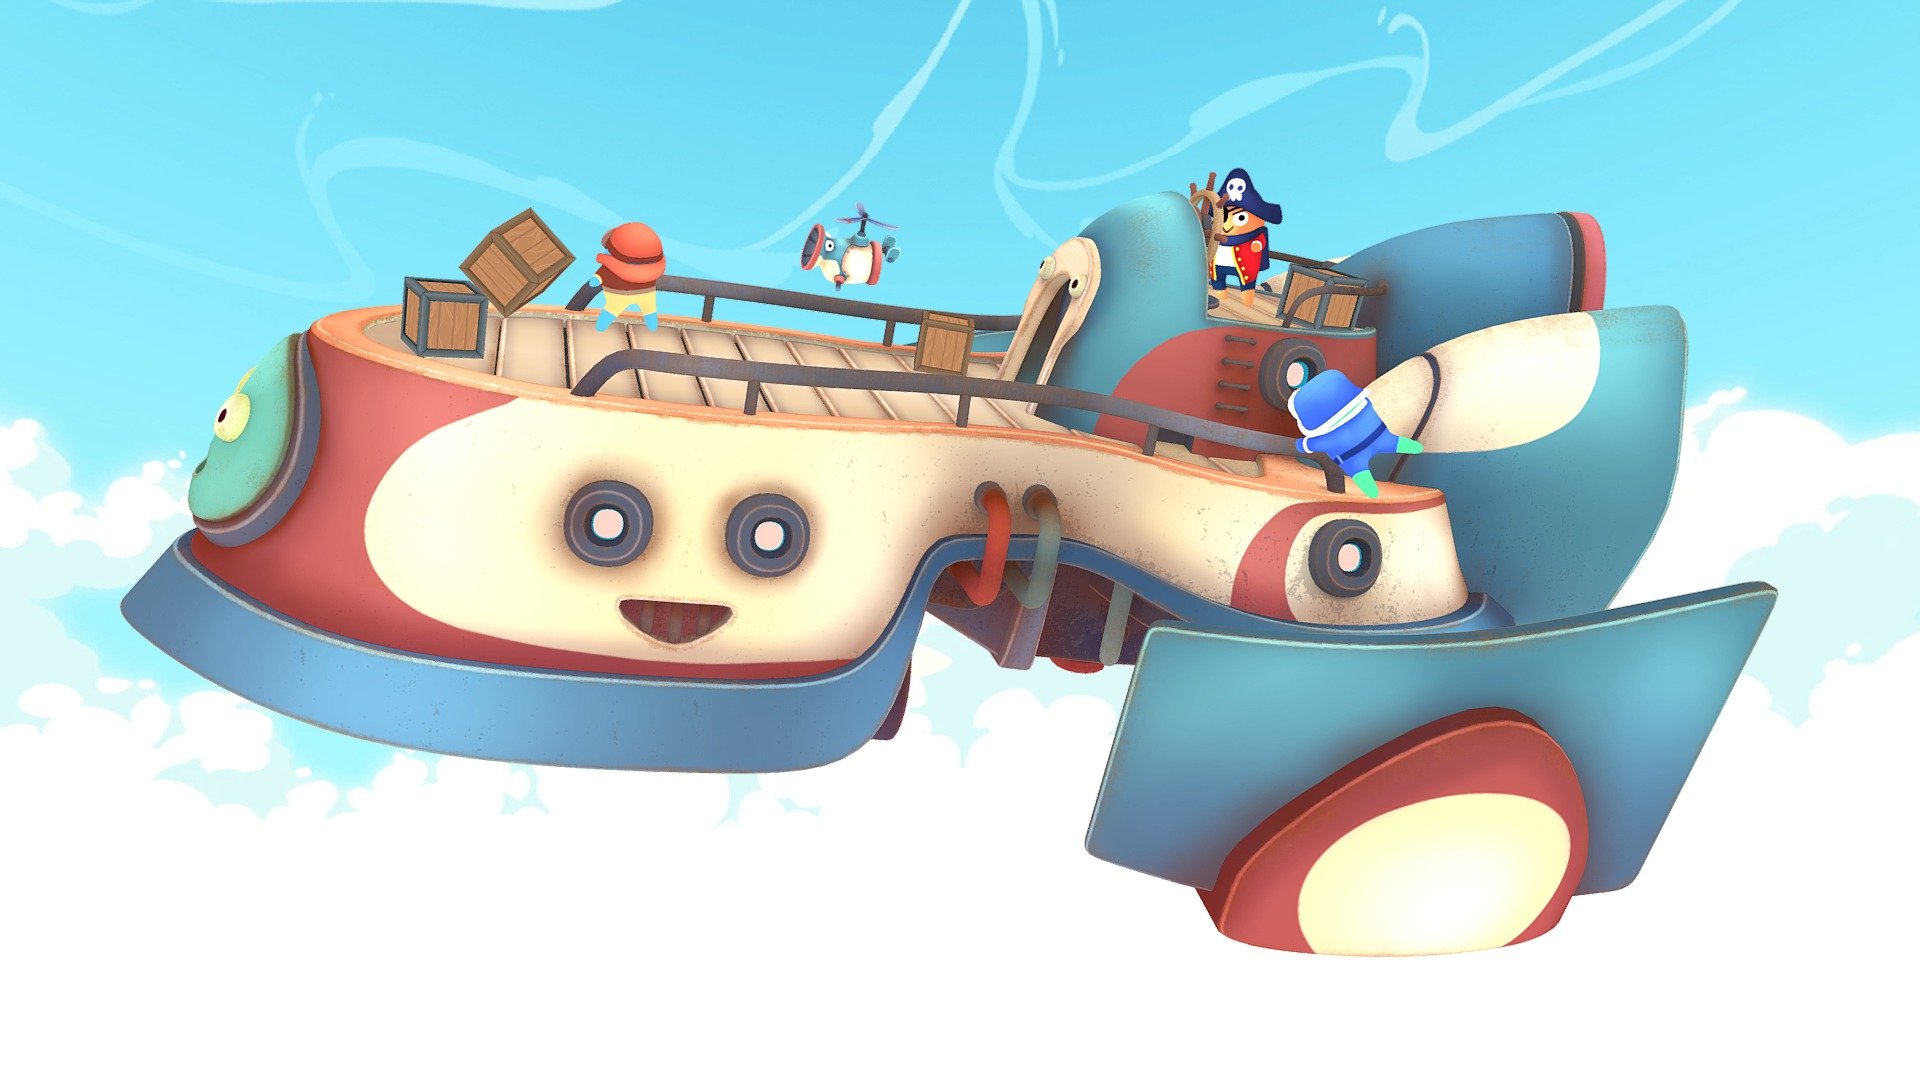 Cartoony ship with some silly character doing things ^^ - Cartoon Airship - 3D model by BlackSpire 3d model